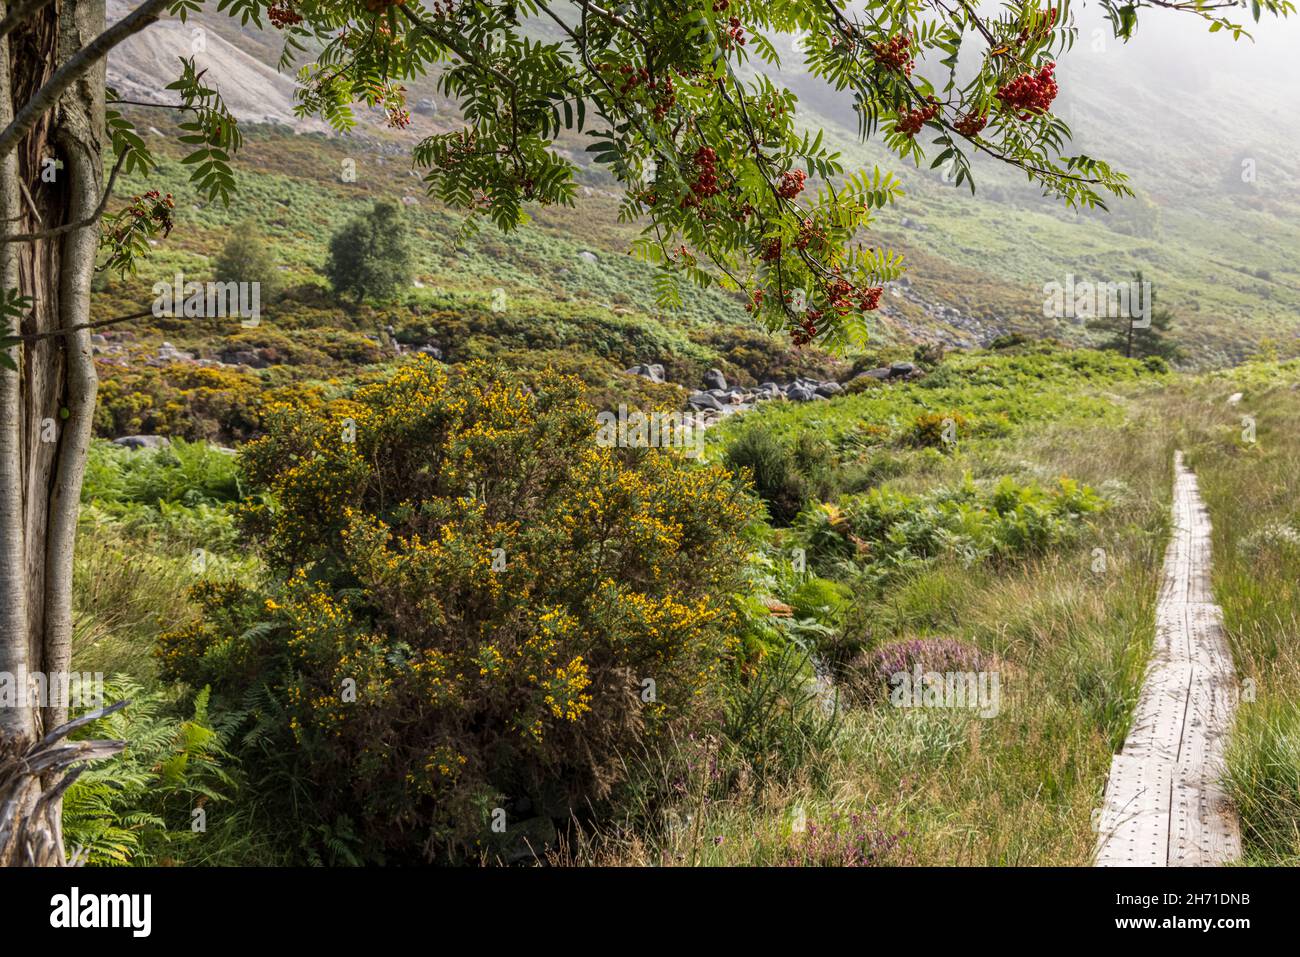 Mountain Ash, or Rowan tree with redberries by St Kevins way, Glendasan, County Wicklow, Ireland, Stock Photo